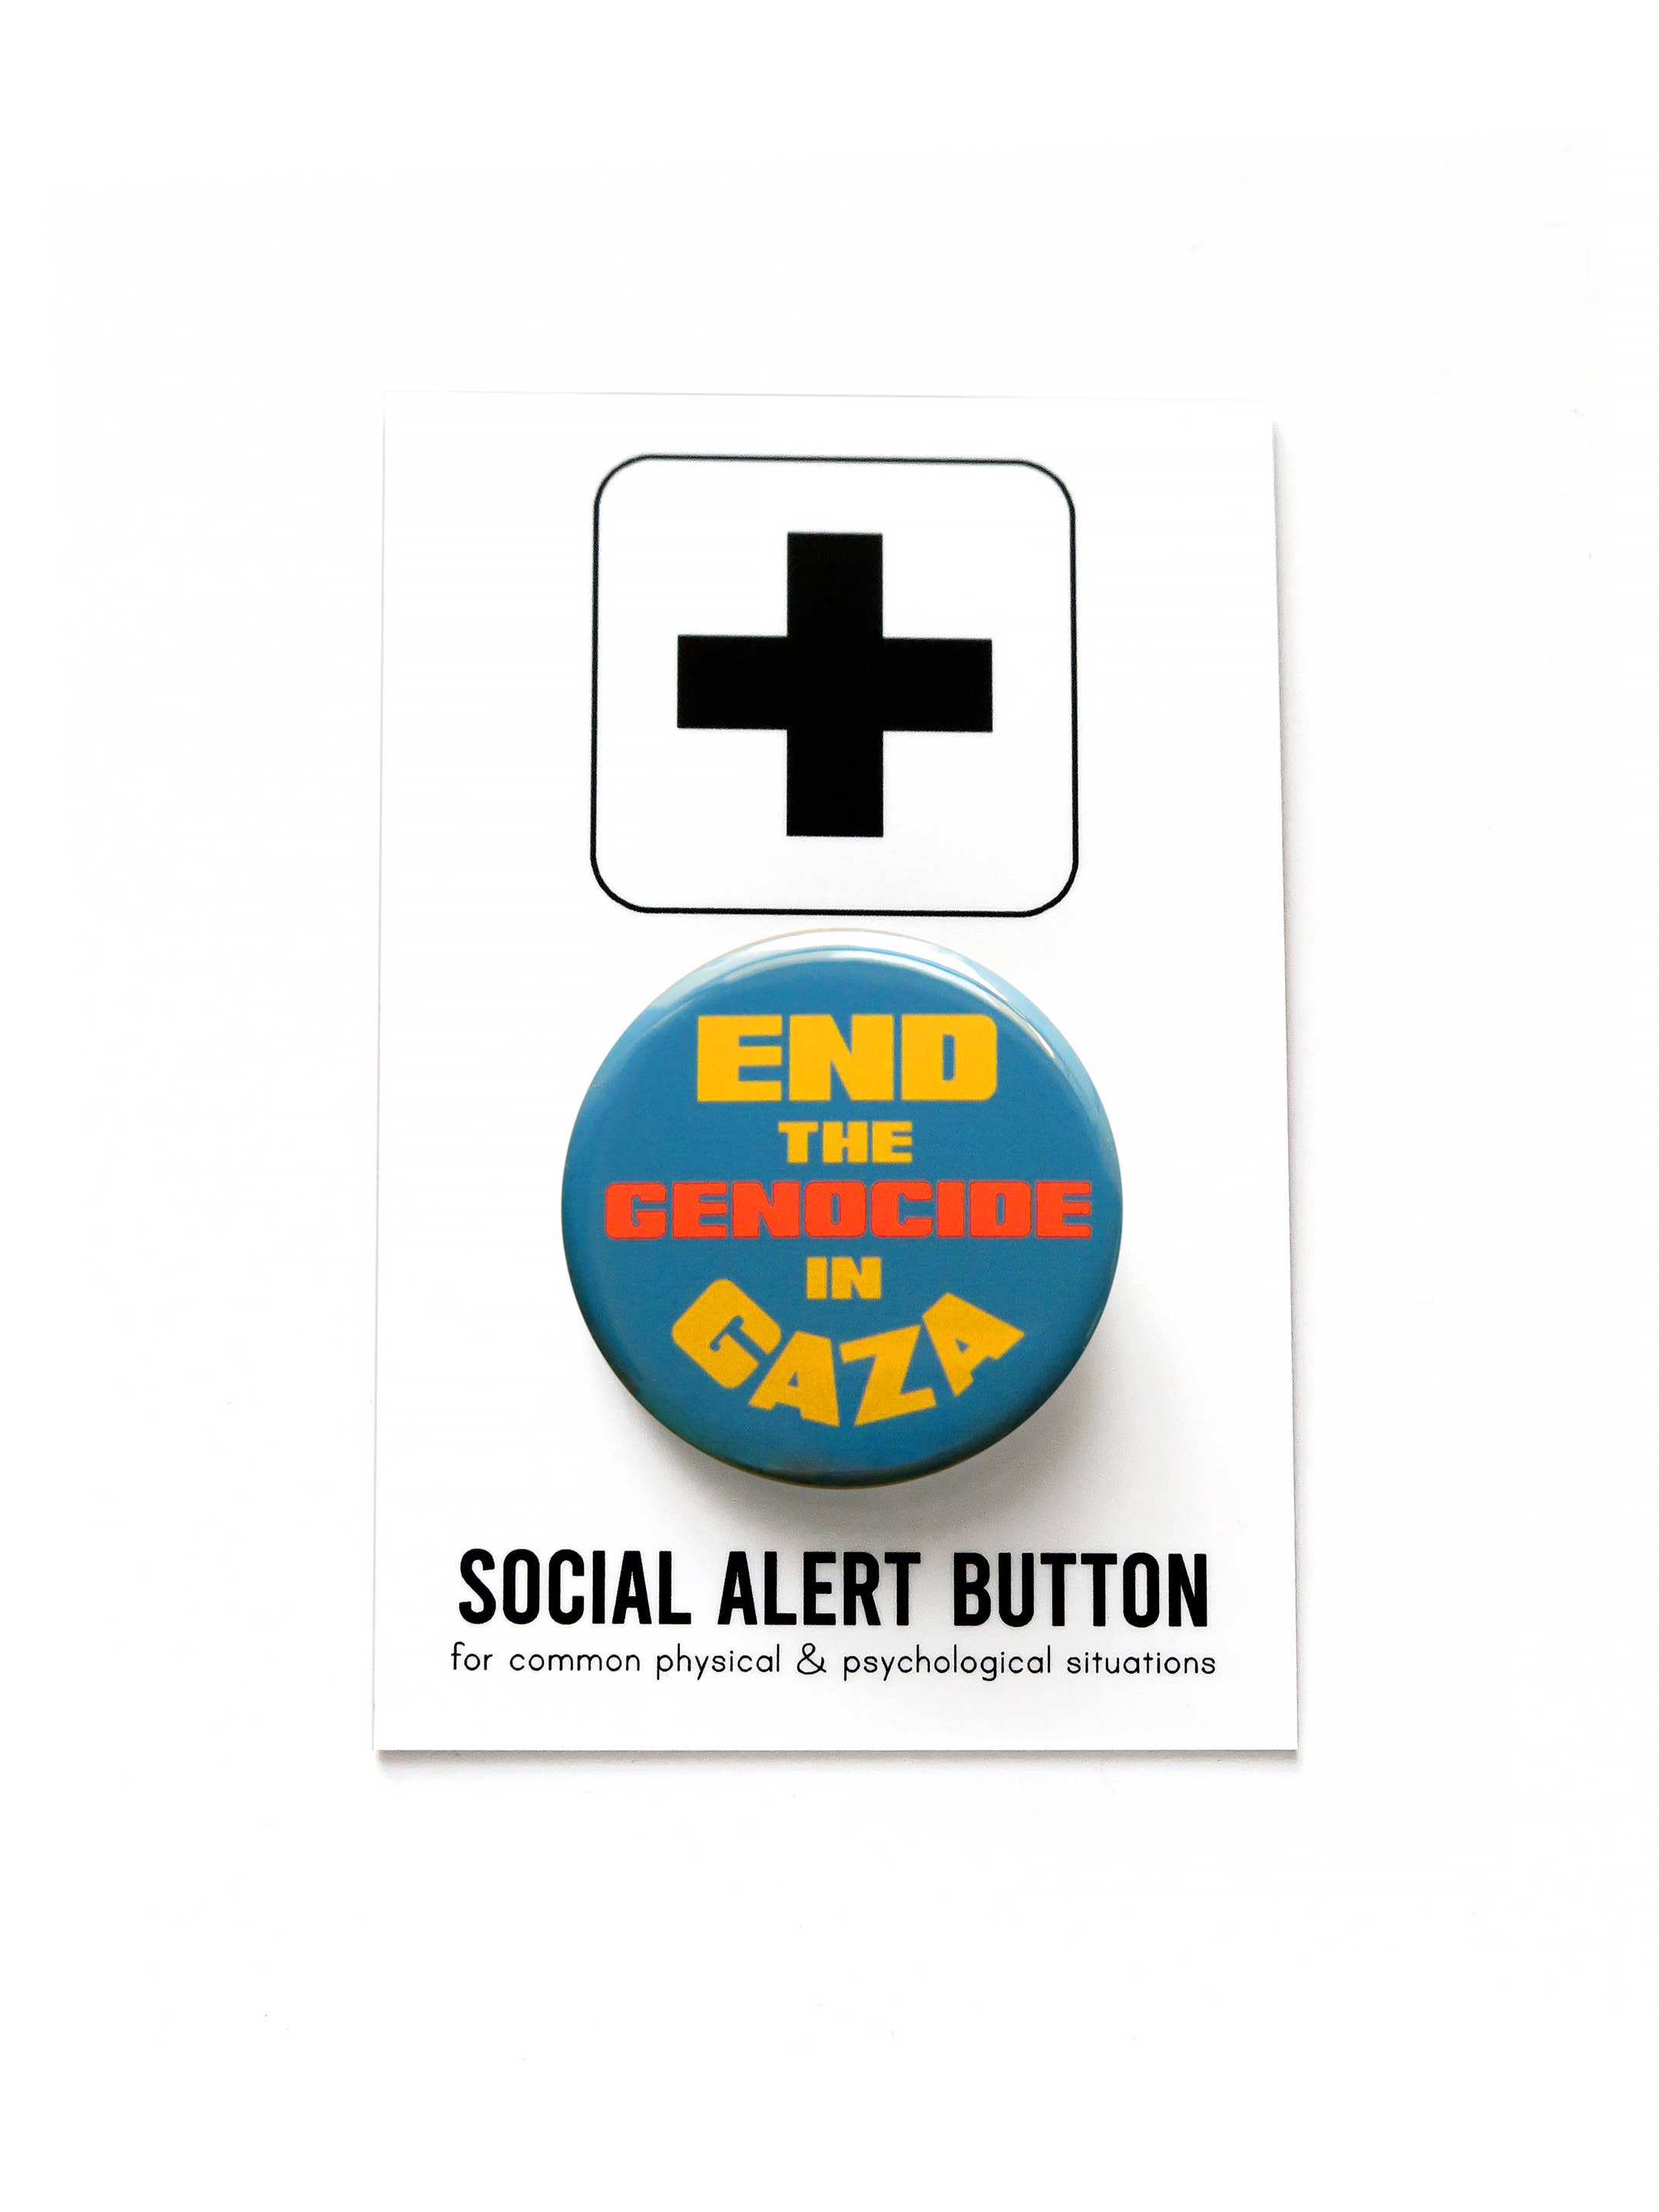 End The Genocide in Gaza Ceasefire Pin Back Button